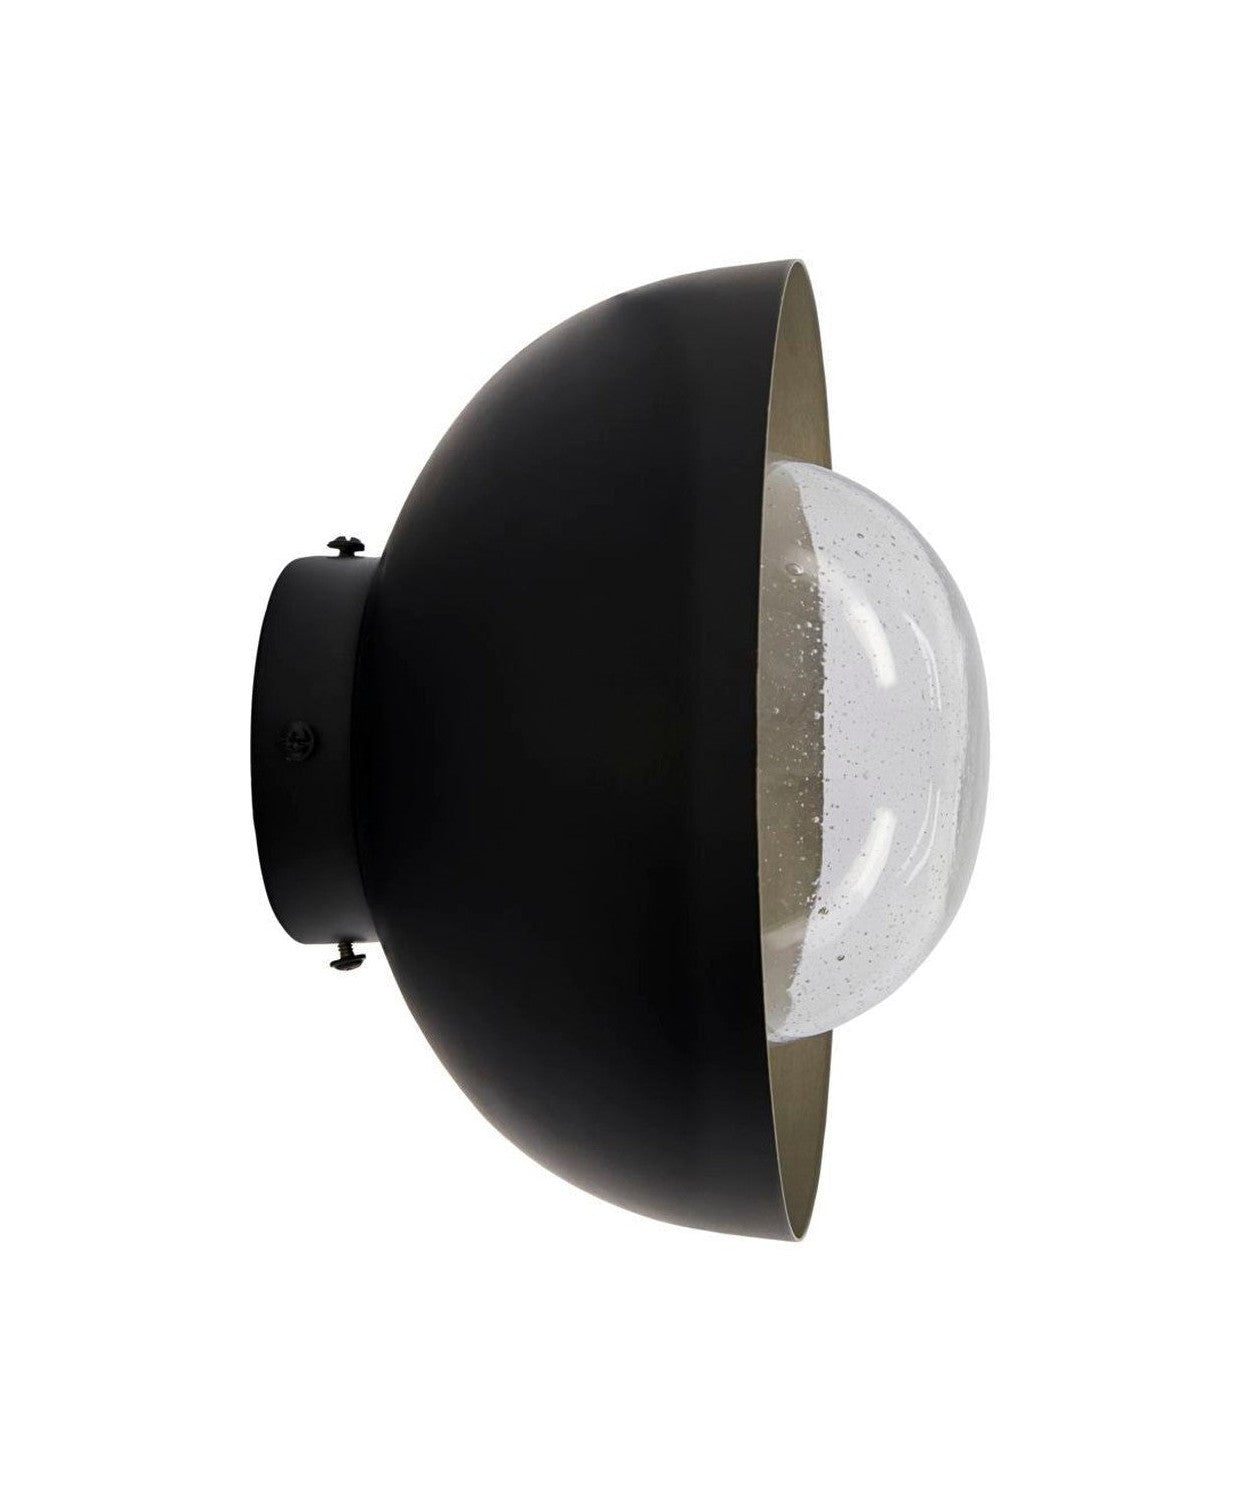 Di Nord Wall Lamp, bnmidtre, carbone